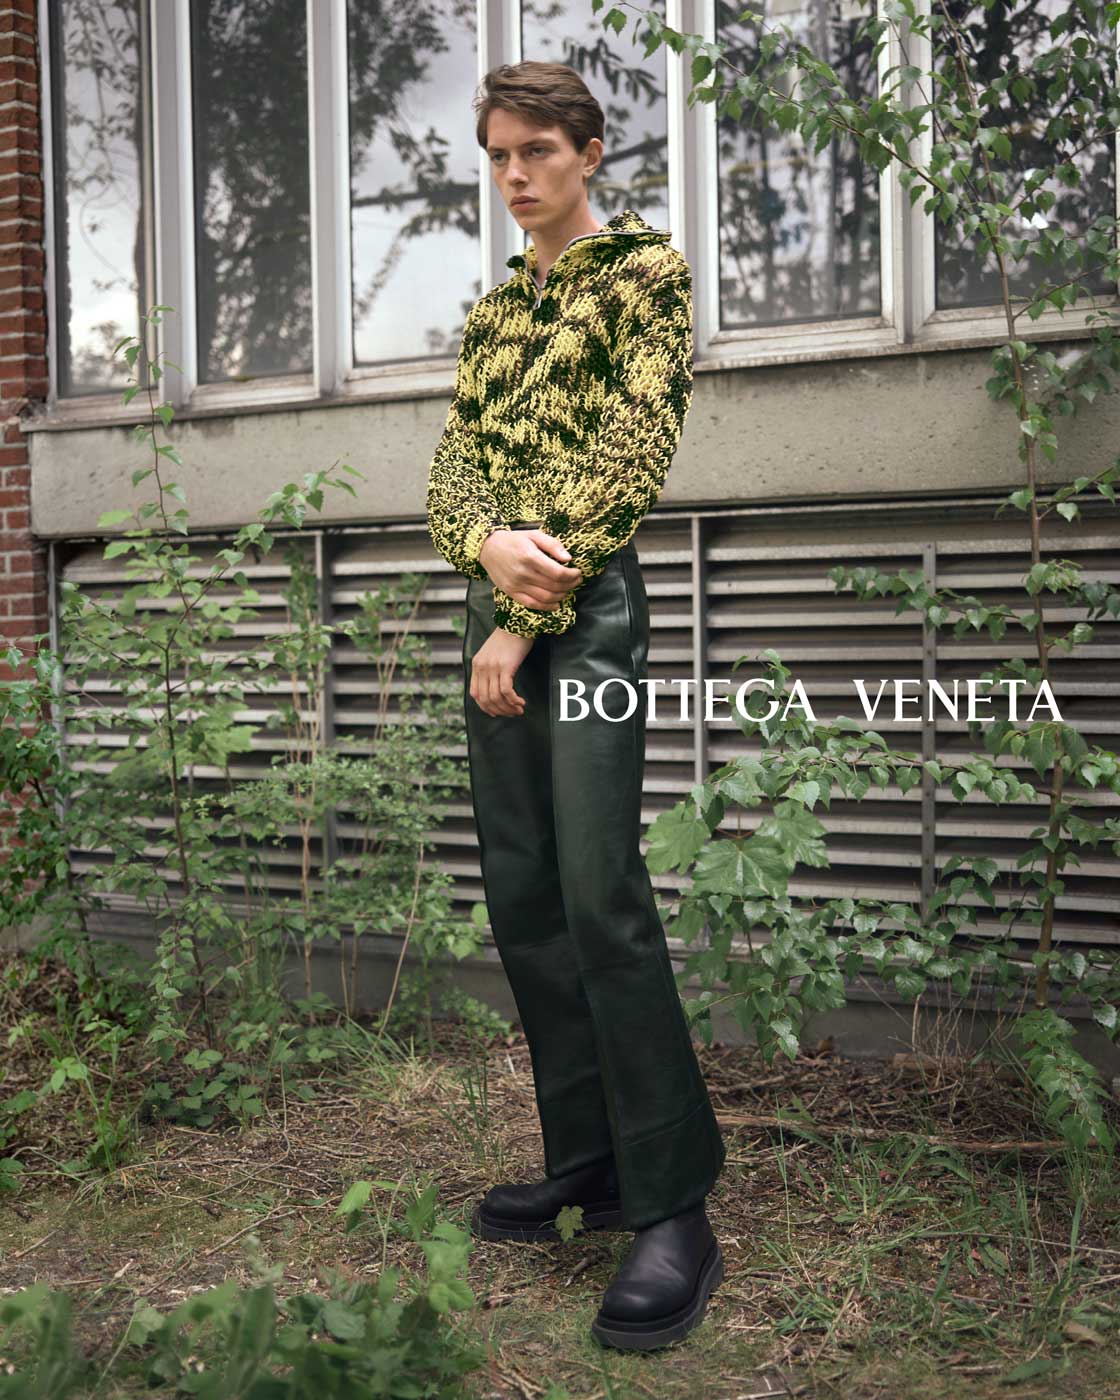 The New Bottega Veneta Campaign Is Our Very Own Sun-Filled Super Yacht  Fantasy